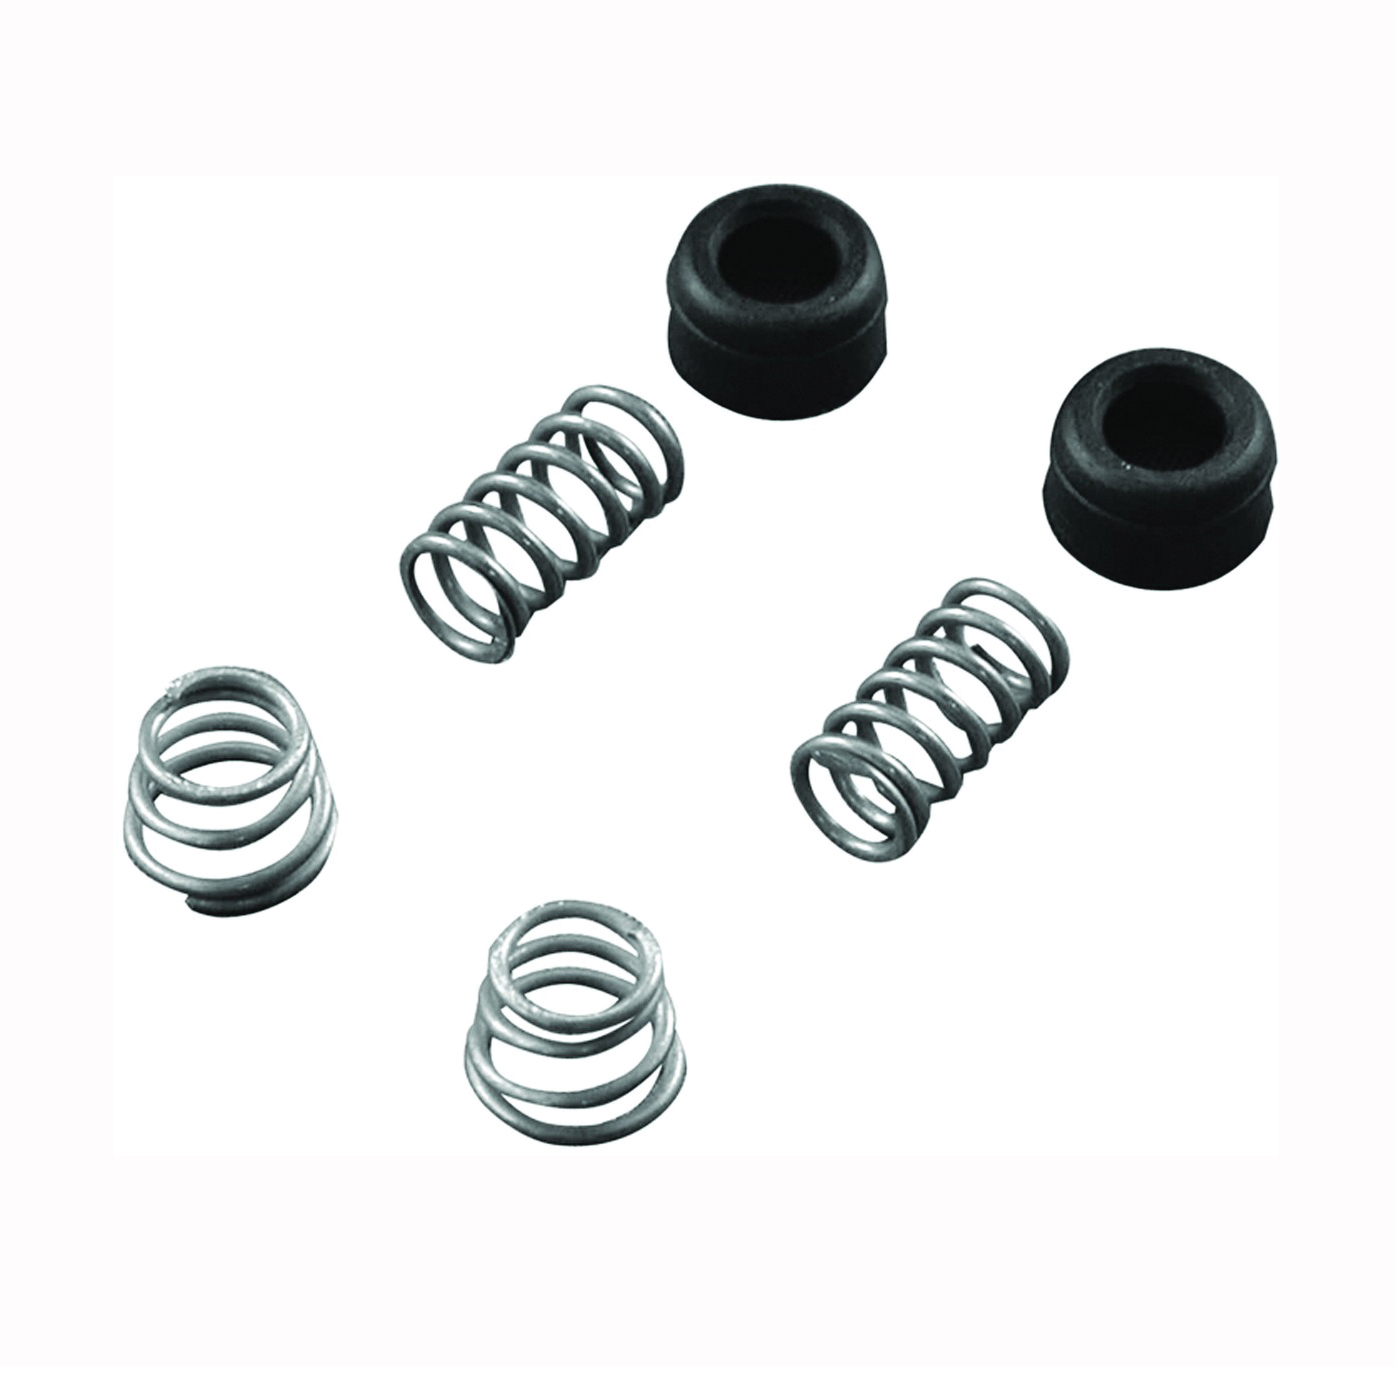 DL-17 Series 88050 Seat and Spring Kit, Rubber/Stainless Steel, Black